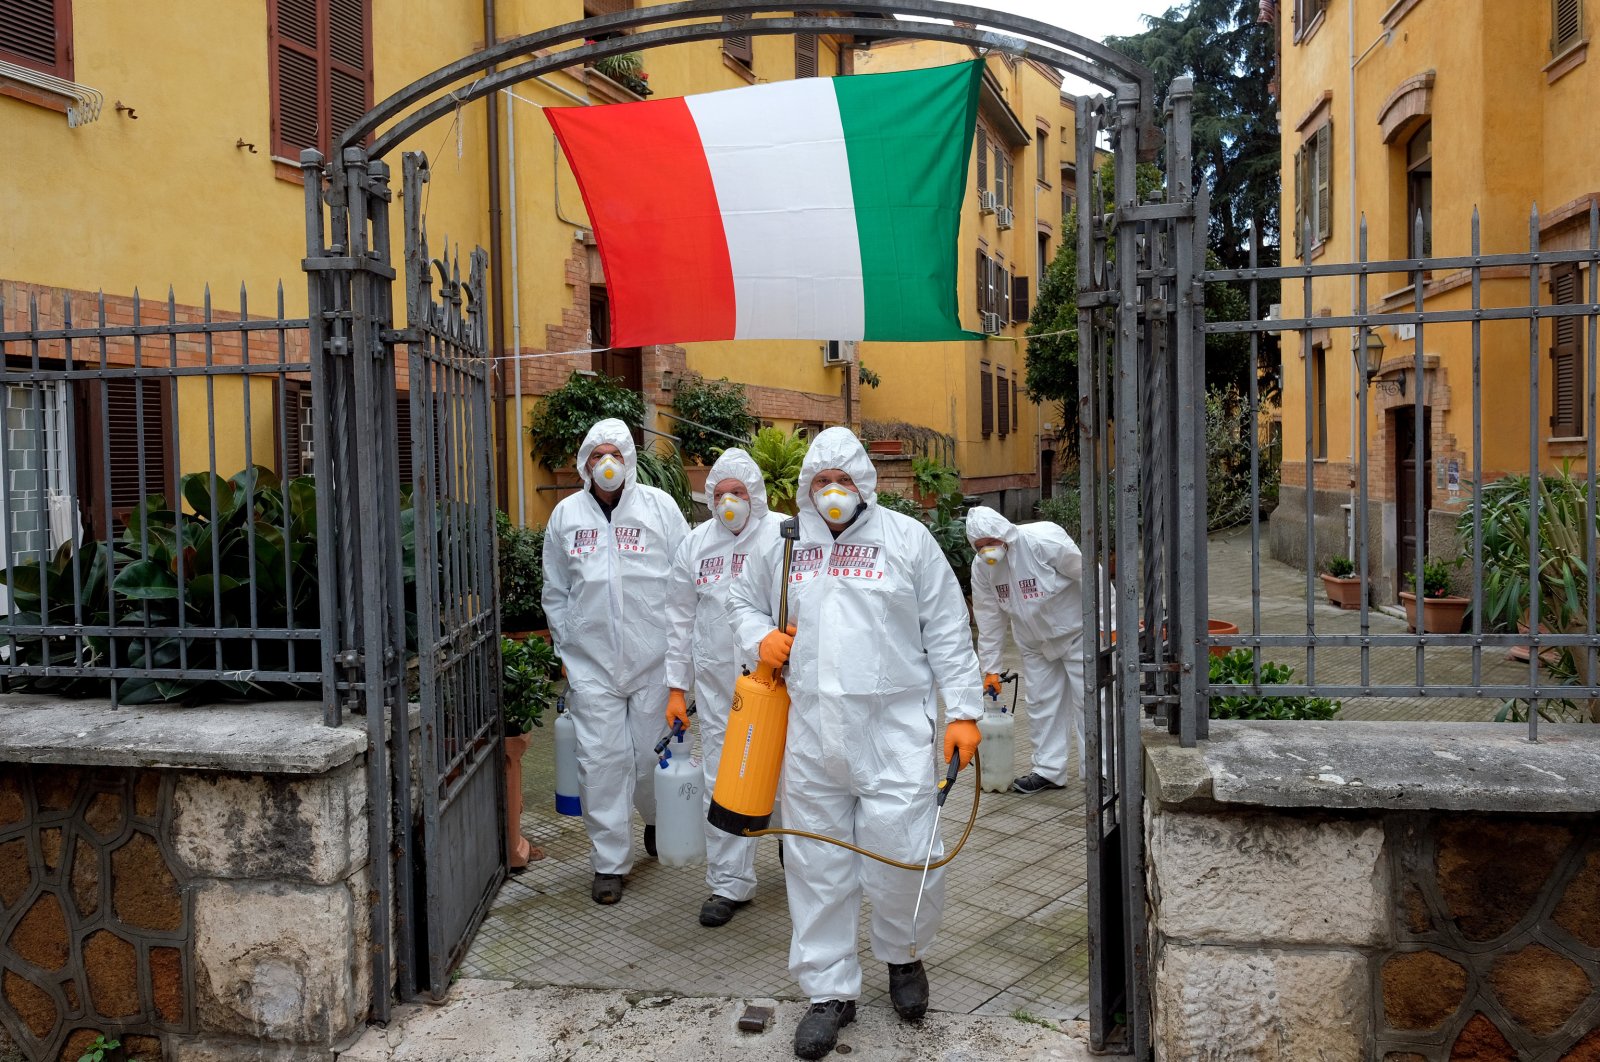 Workers wearing protective outfits sanitize a neighborhood to contain the spread of the coronavirus, Rome, Saturday, March 28, 2020. (AP Photo)